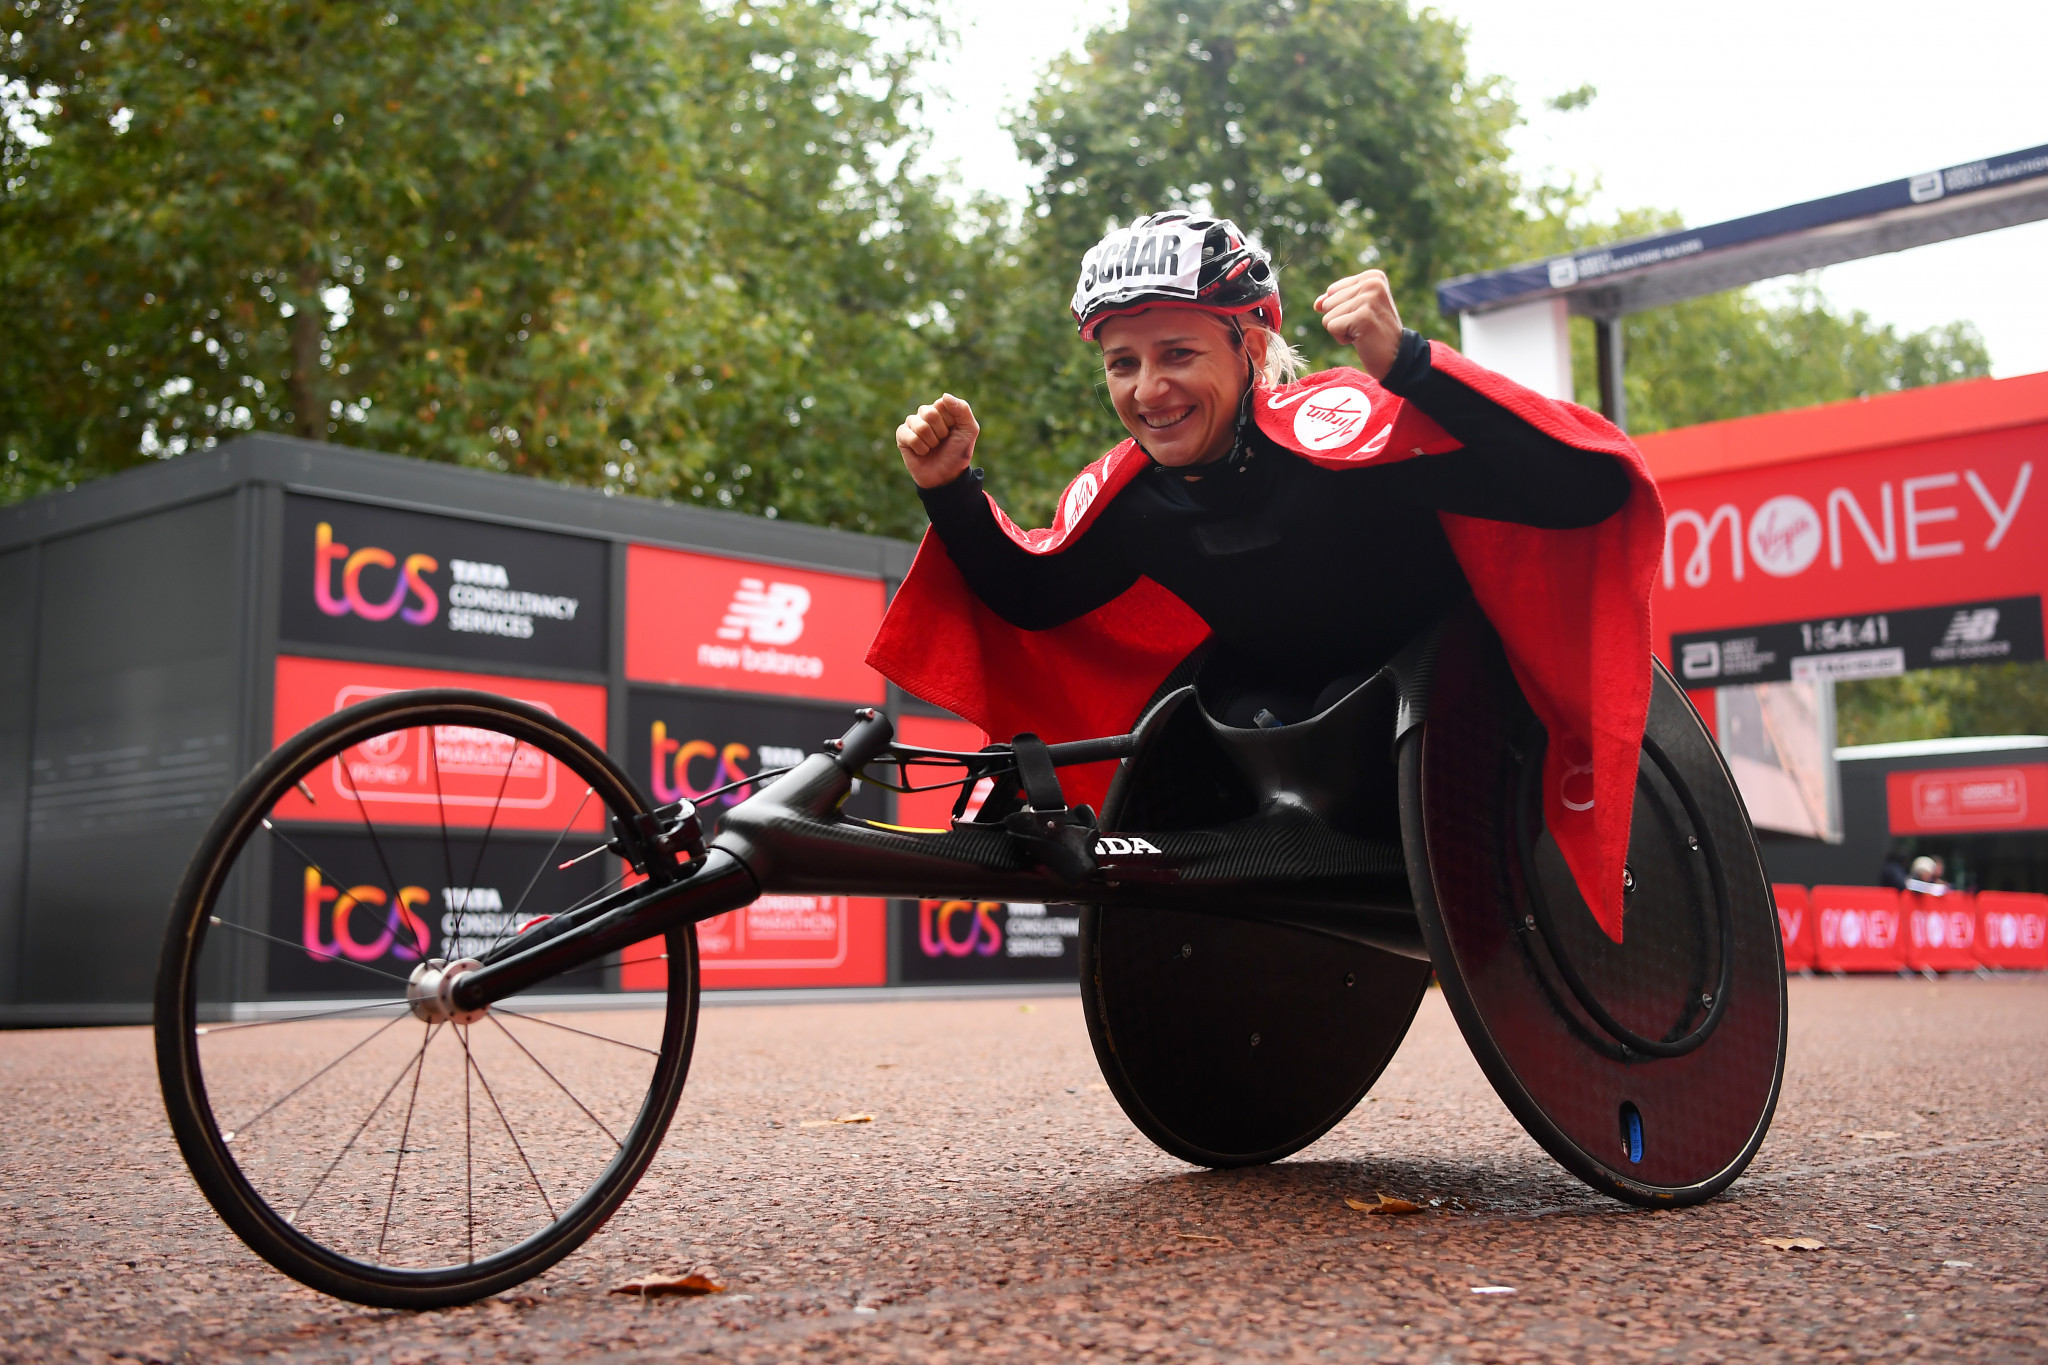 The winner of the women's wheelchair race at last year's London Marathon Manuela Schar described the increase in prize money as "huge" ©Getty Images 